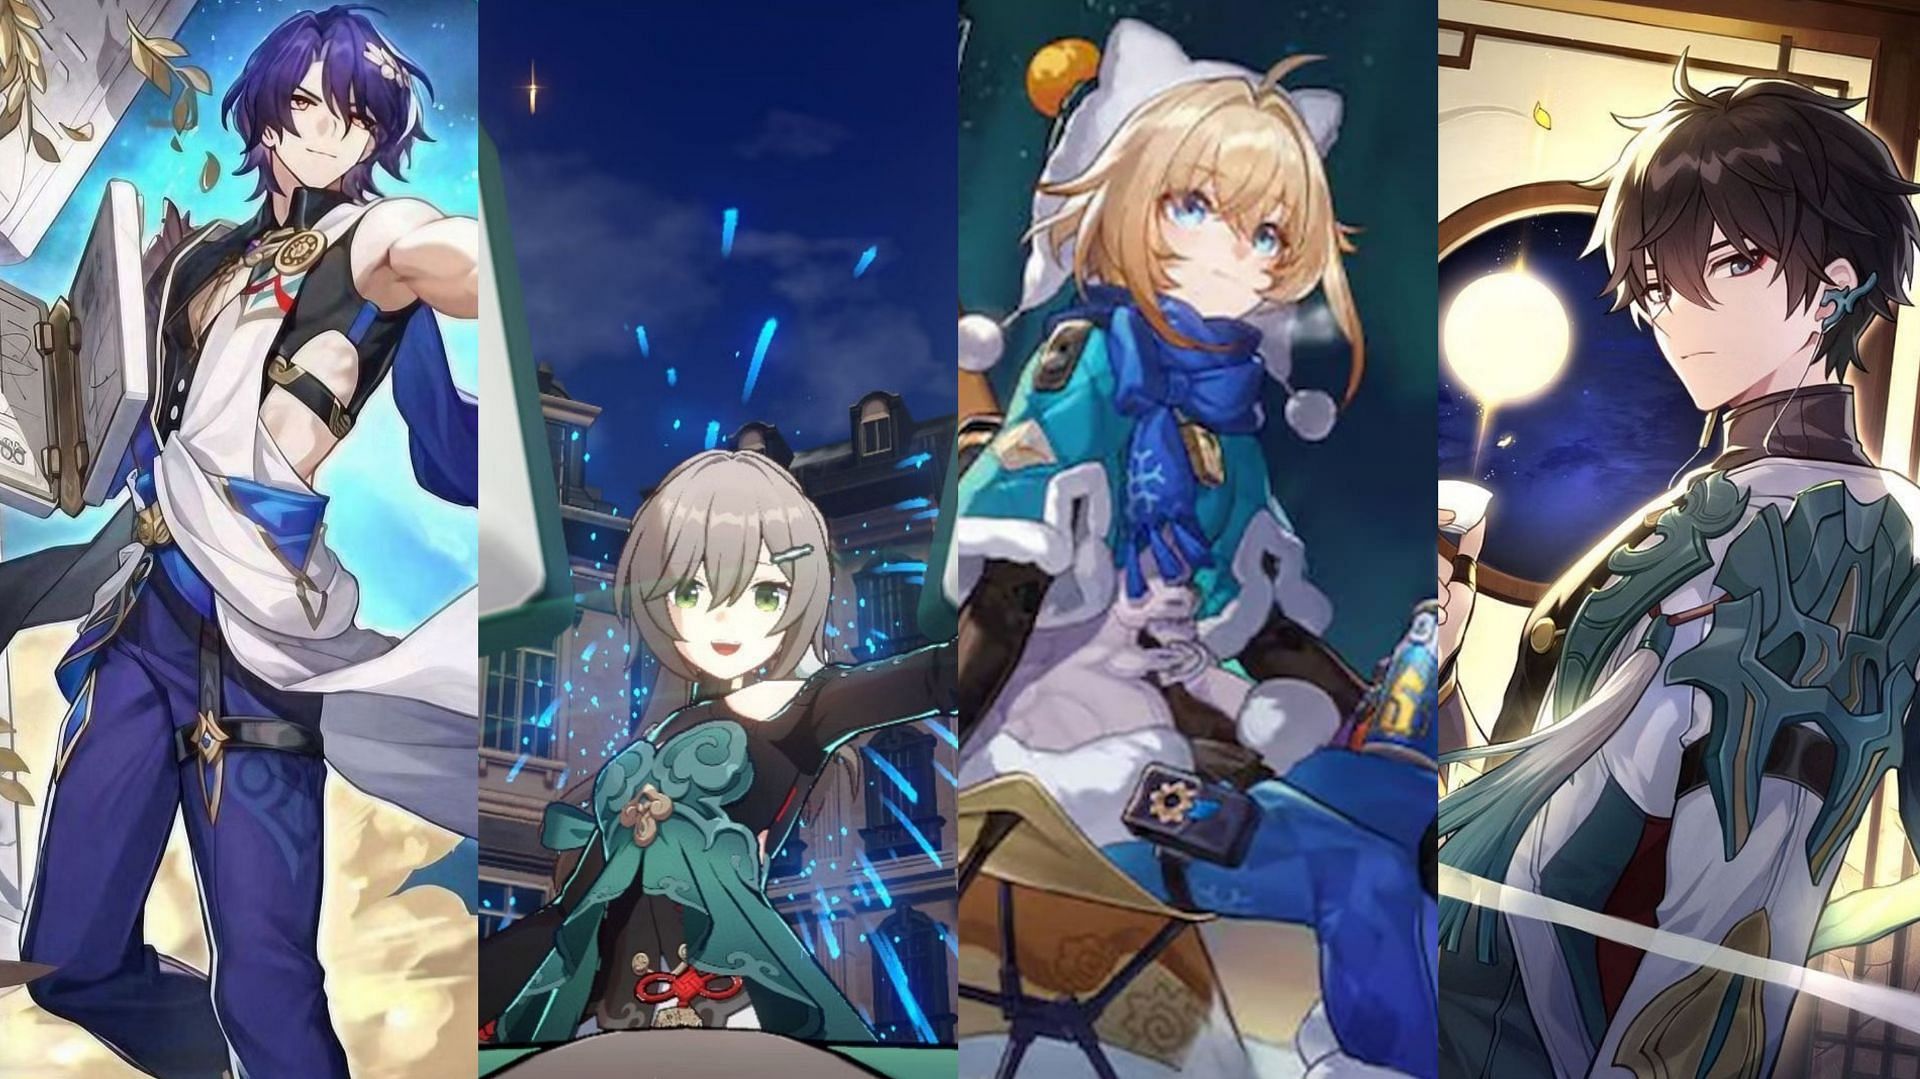 F2p characters in version 1.6 of Star Rail (Image via HoYoverse)